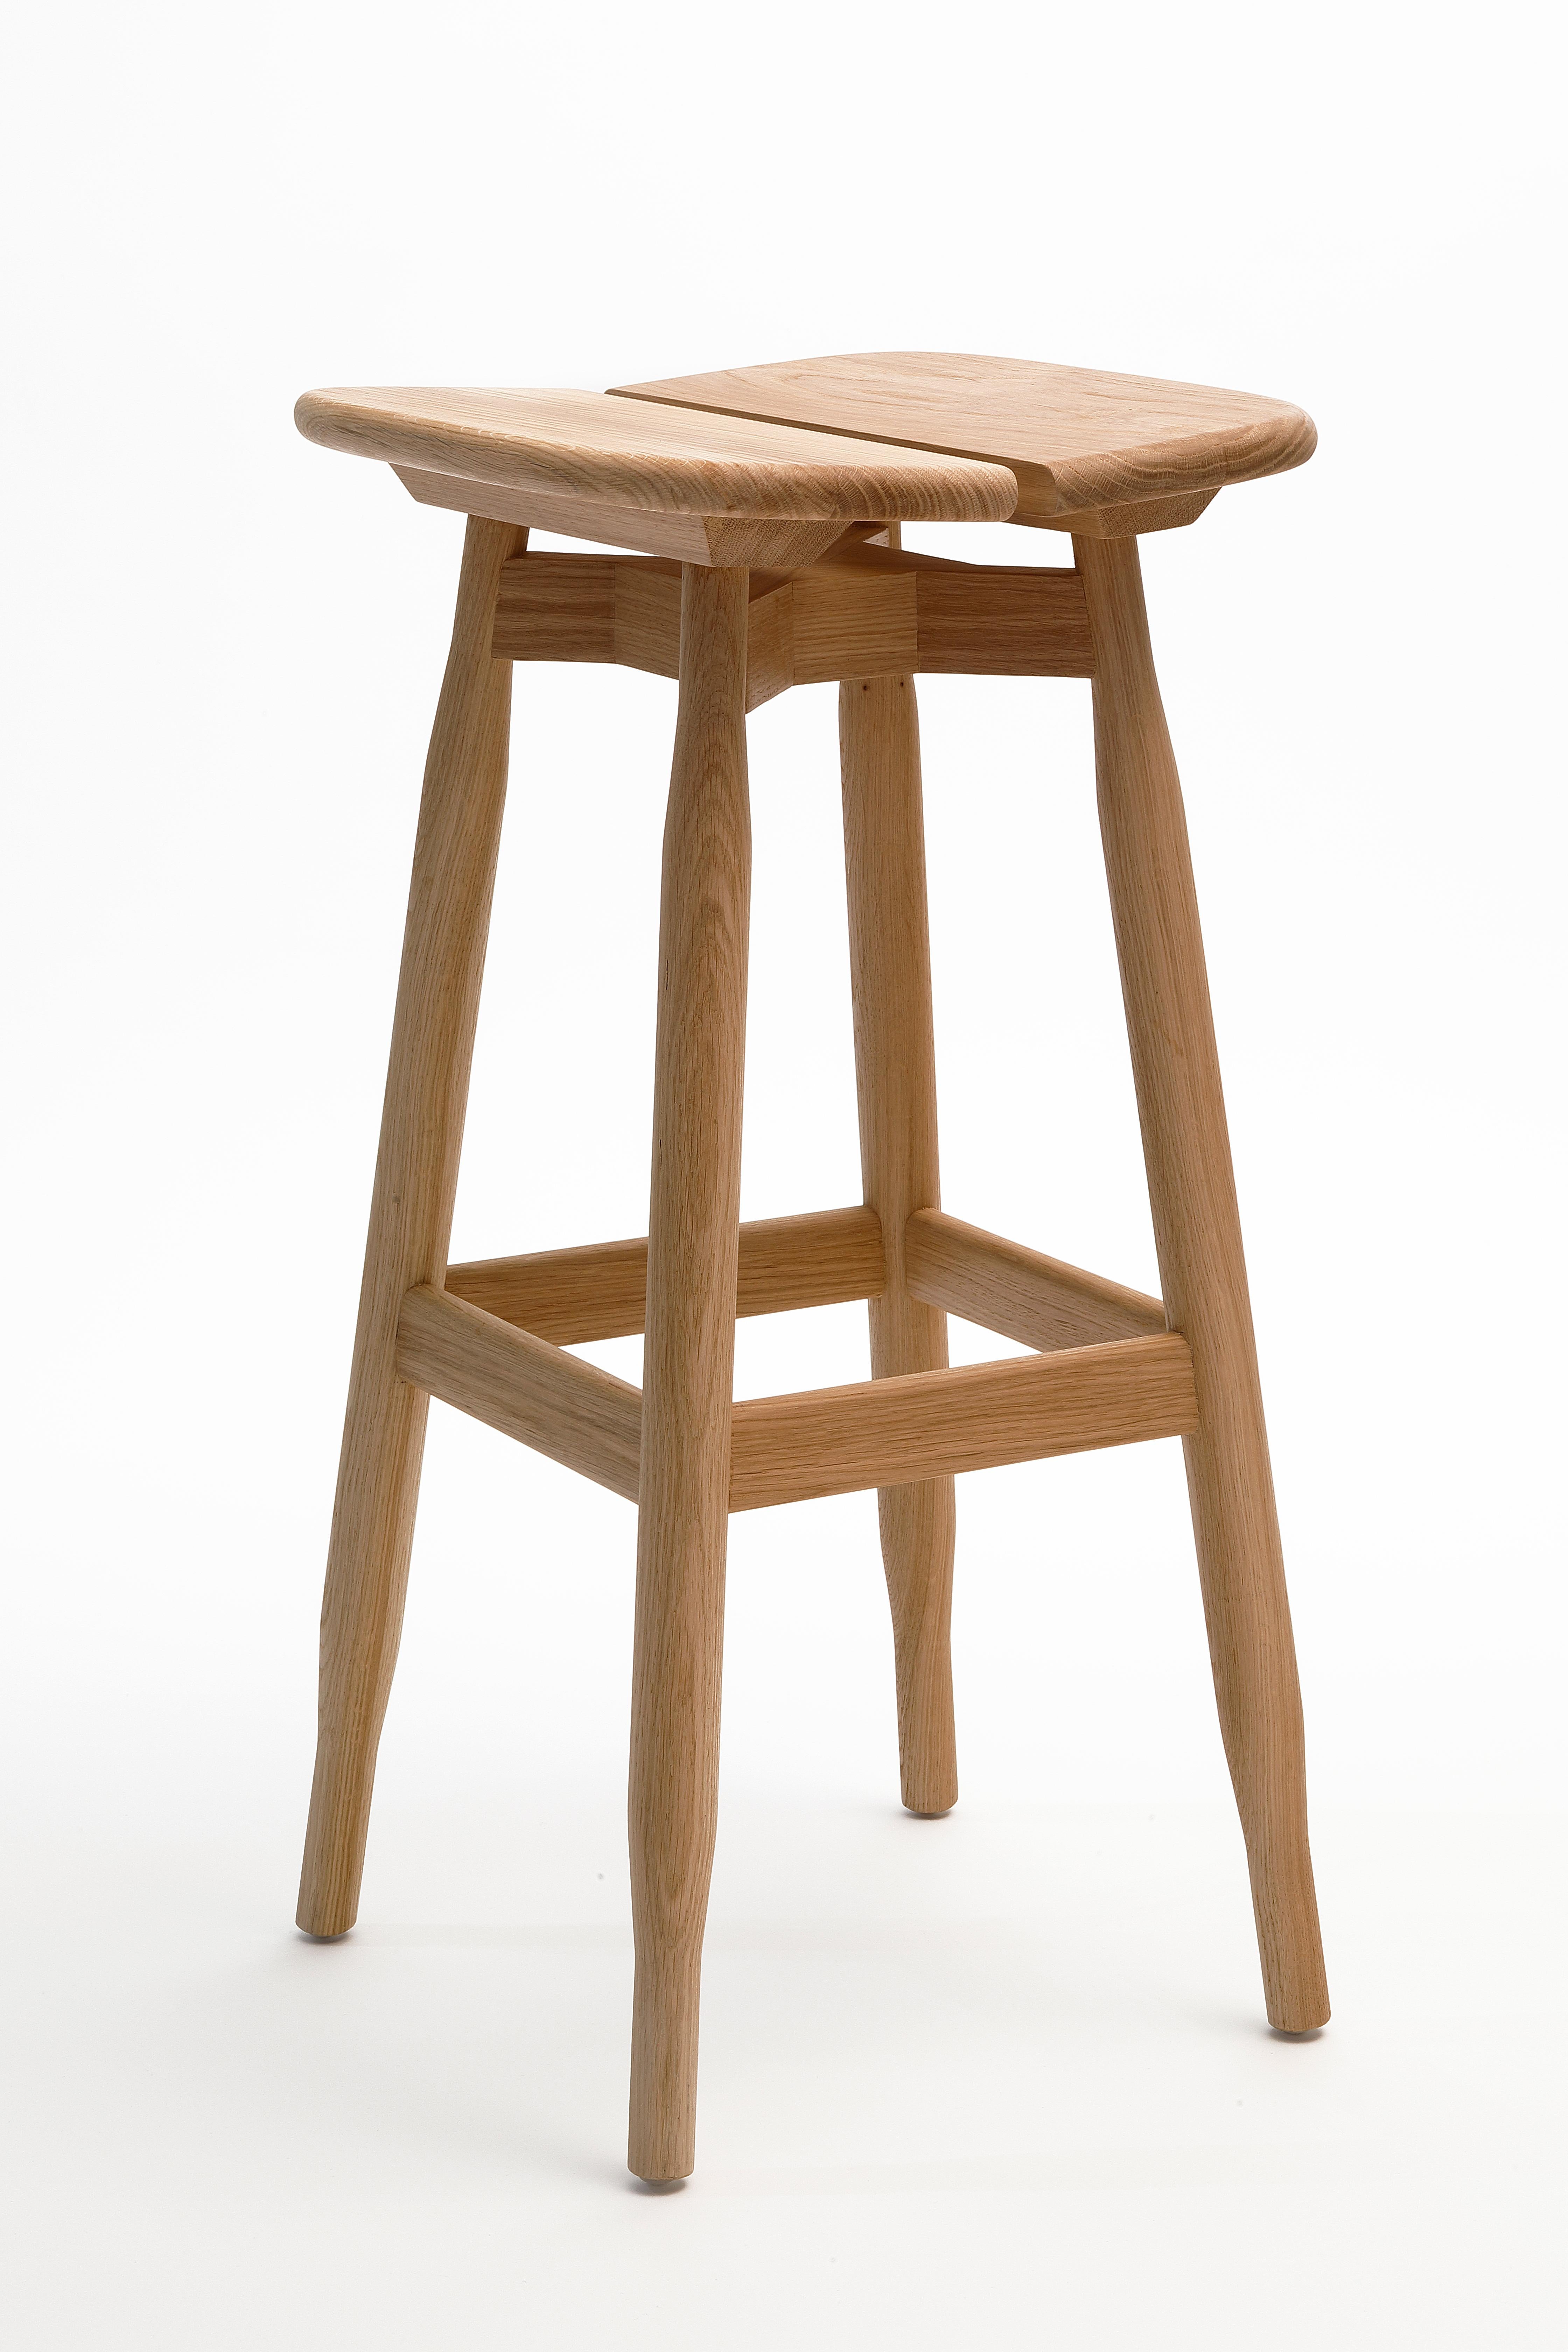 High natural oak DOM stool by Marcos Zanuso Jr
Materials: High stool, structure, and seat in solid oak, natural varnished or black stained.
Technique: Lacquered metal. Natural or stained wood. 
Dimensions: D 38 x W 40 x H 74 cm


Marco Zanuso JR,